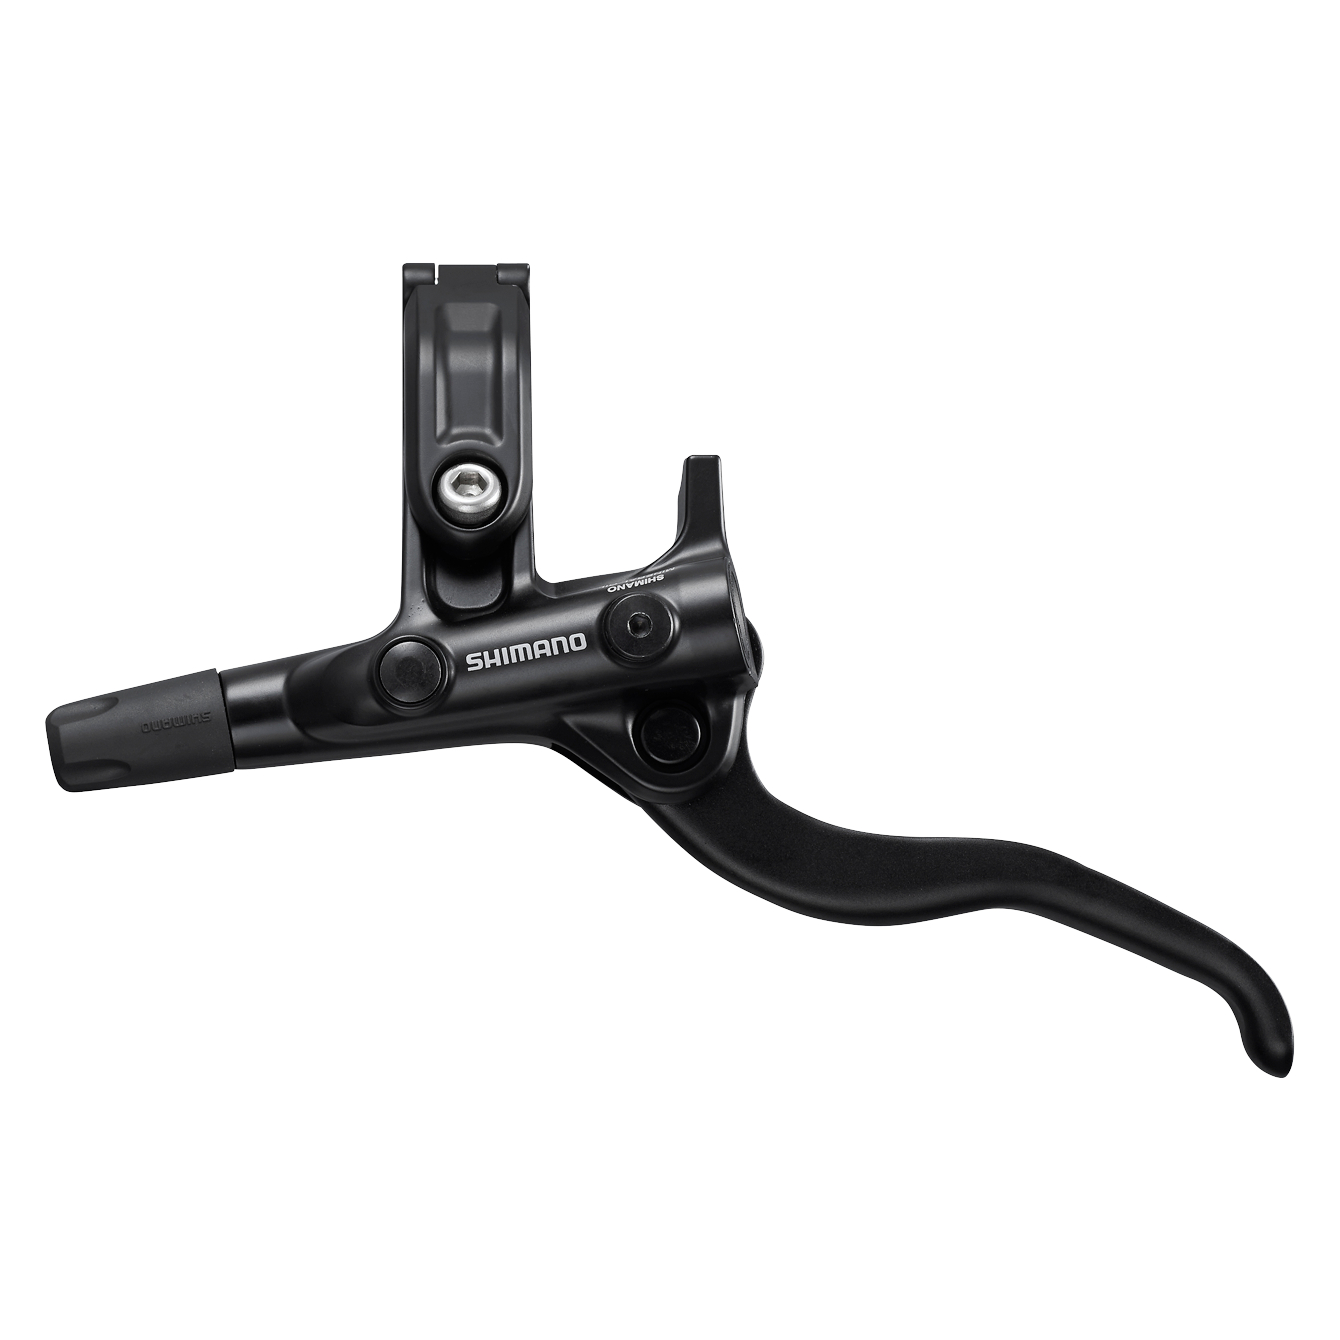 Picture of Shimano Deore BL-M4100 Hydraulic Disc Brake Lever - left